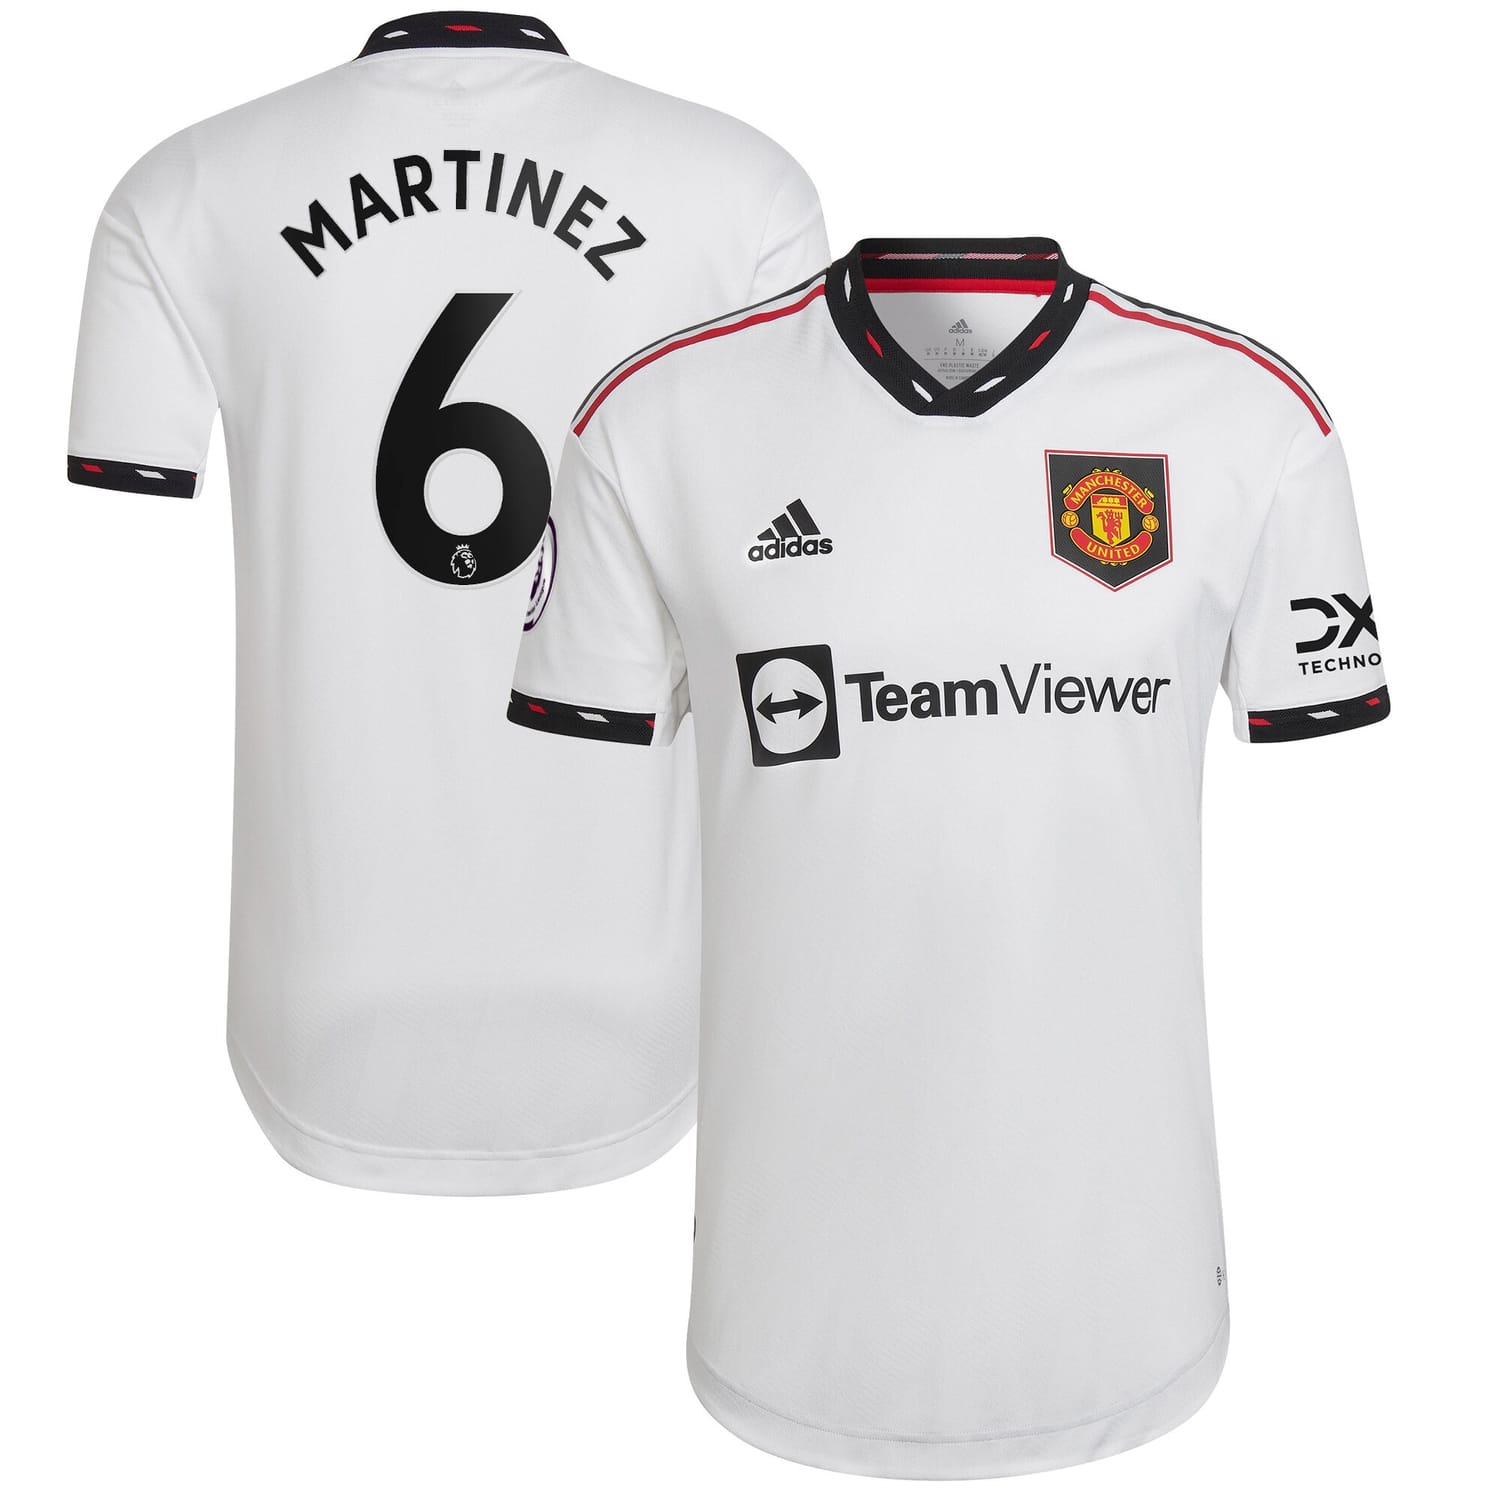 Premier League Manchester United Away Authentic Jersey Shirt White 2022-23 player Lisandro Martínez printing for Men